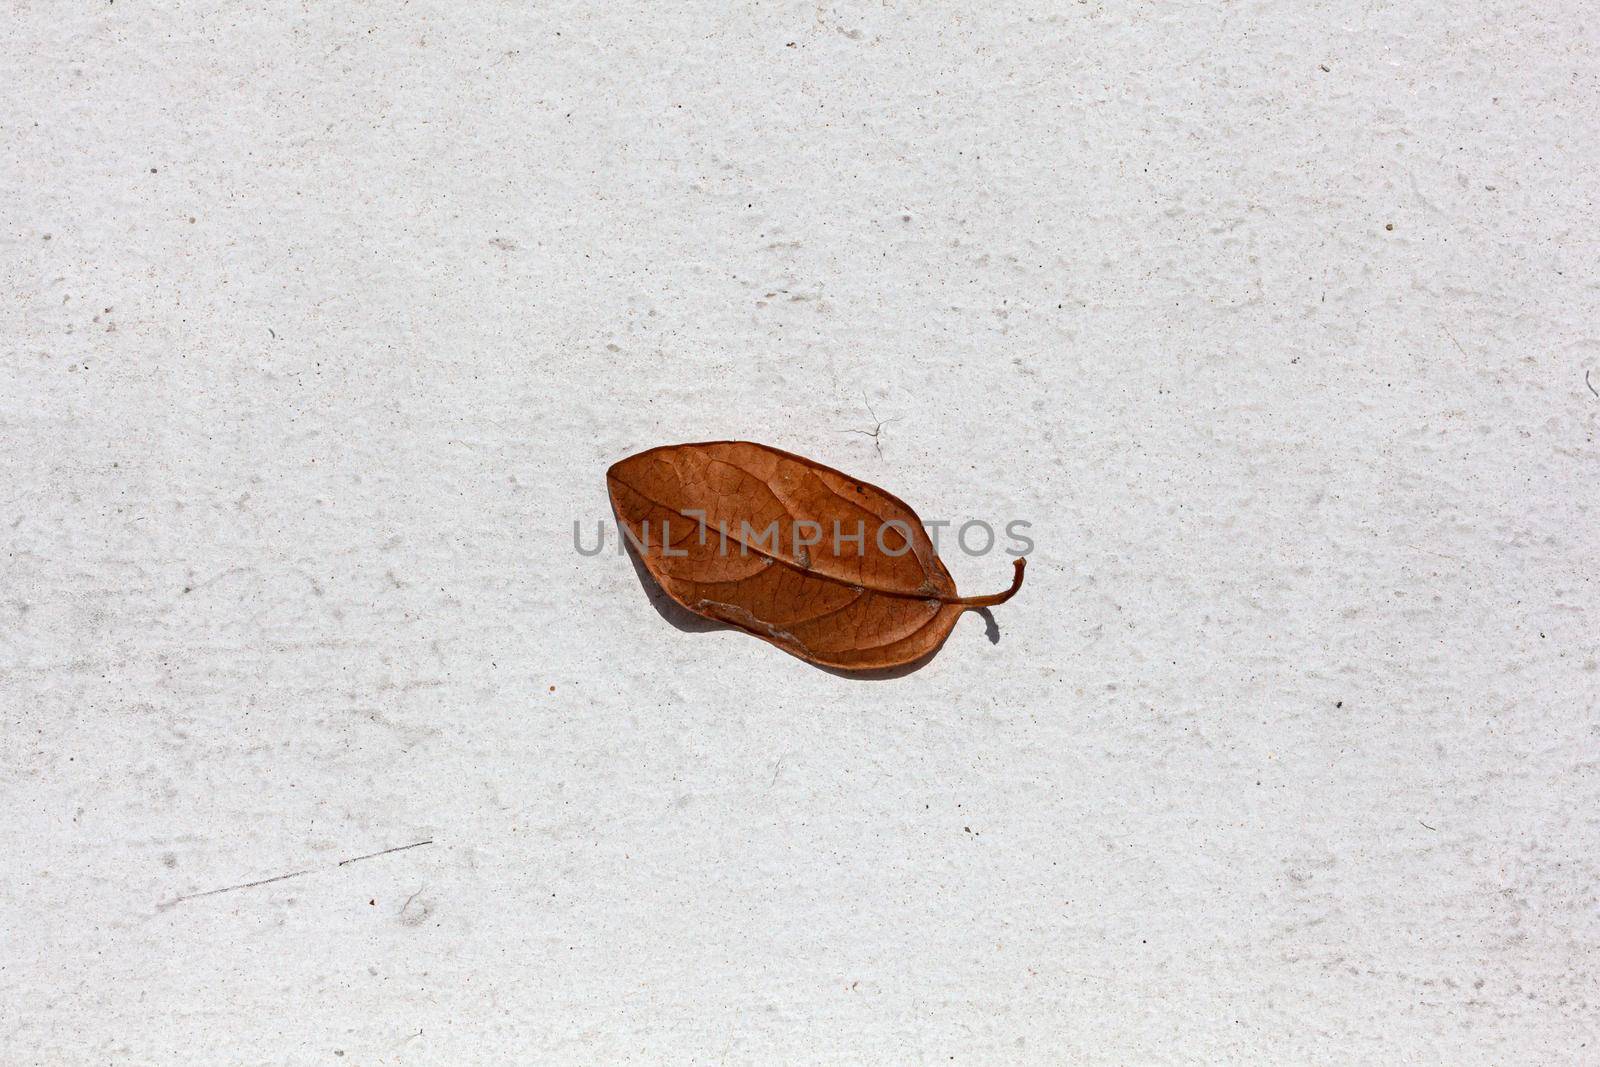 Singke dried leaf on the middle of white concrete floor